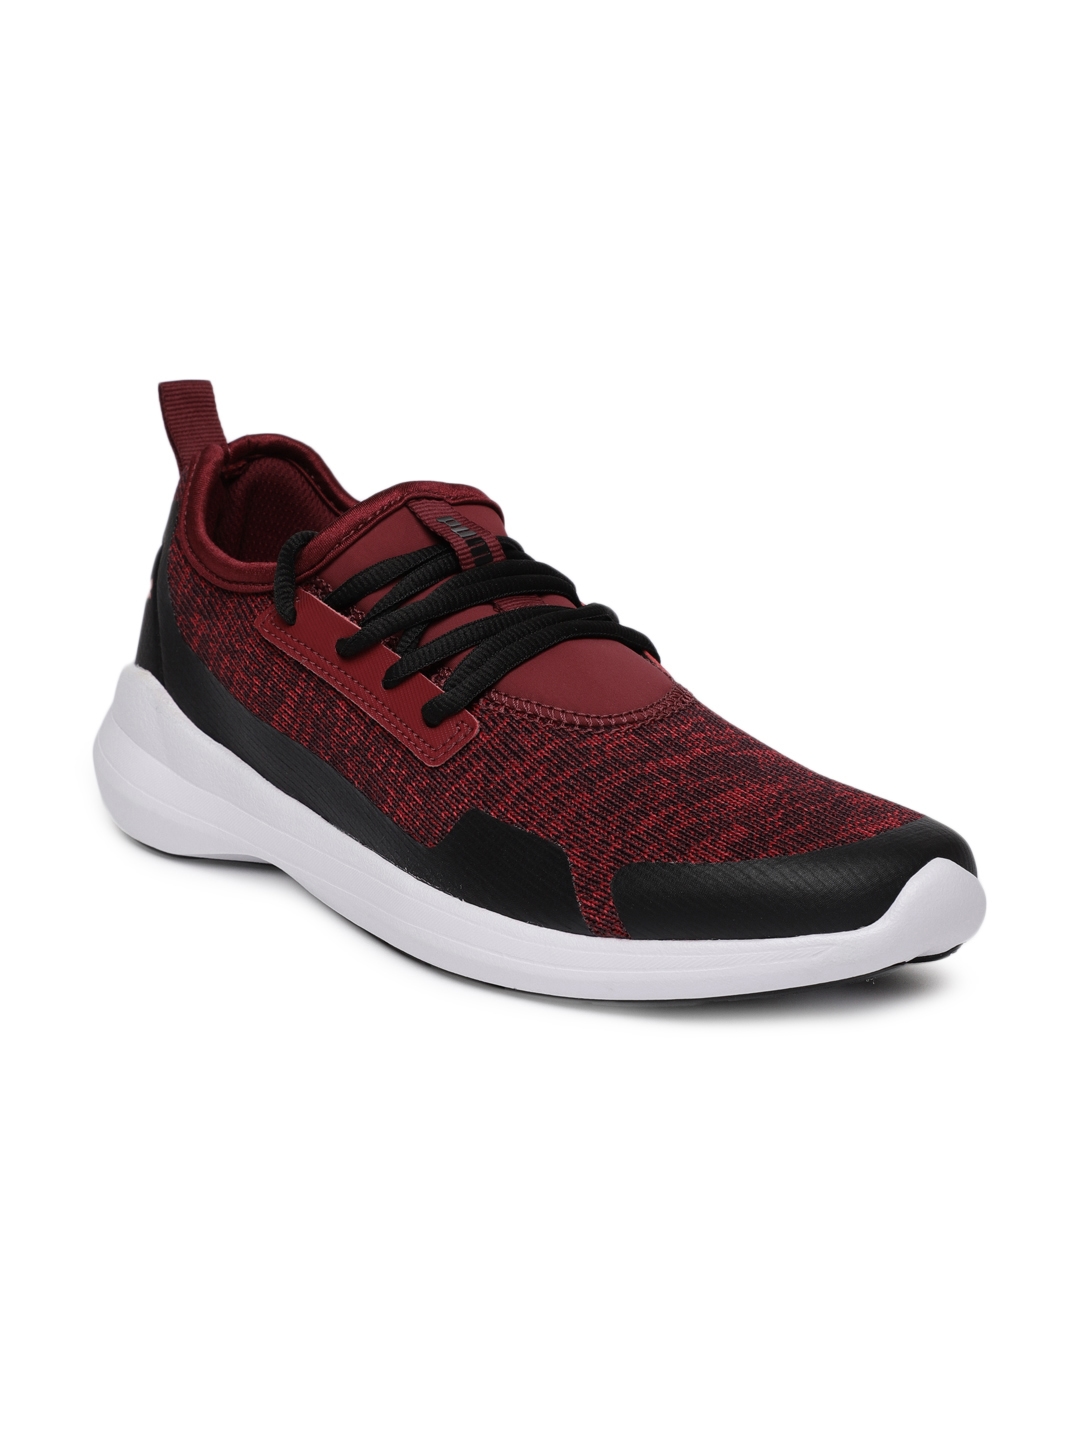 Stride Evo IDP Sneakers - Casual Shoes 